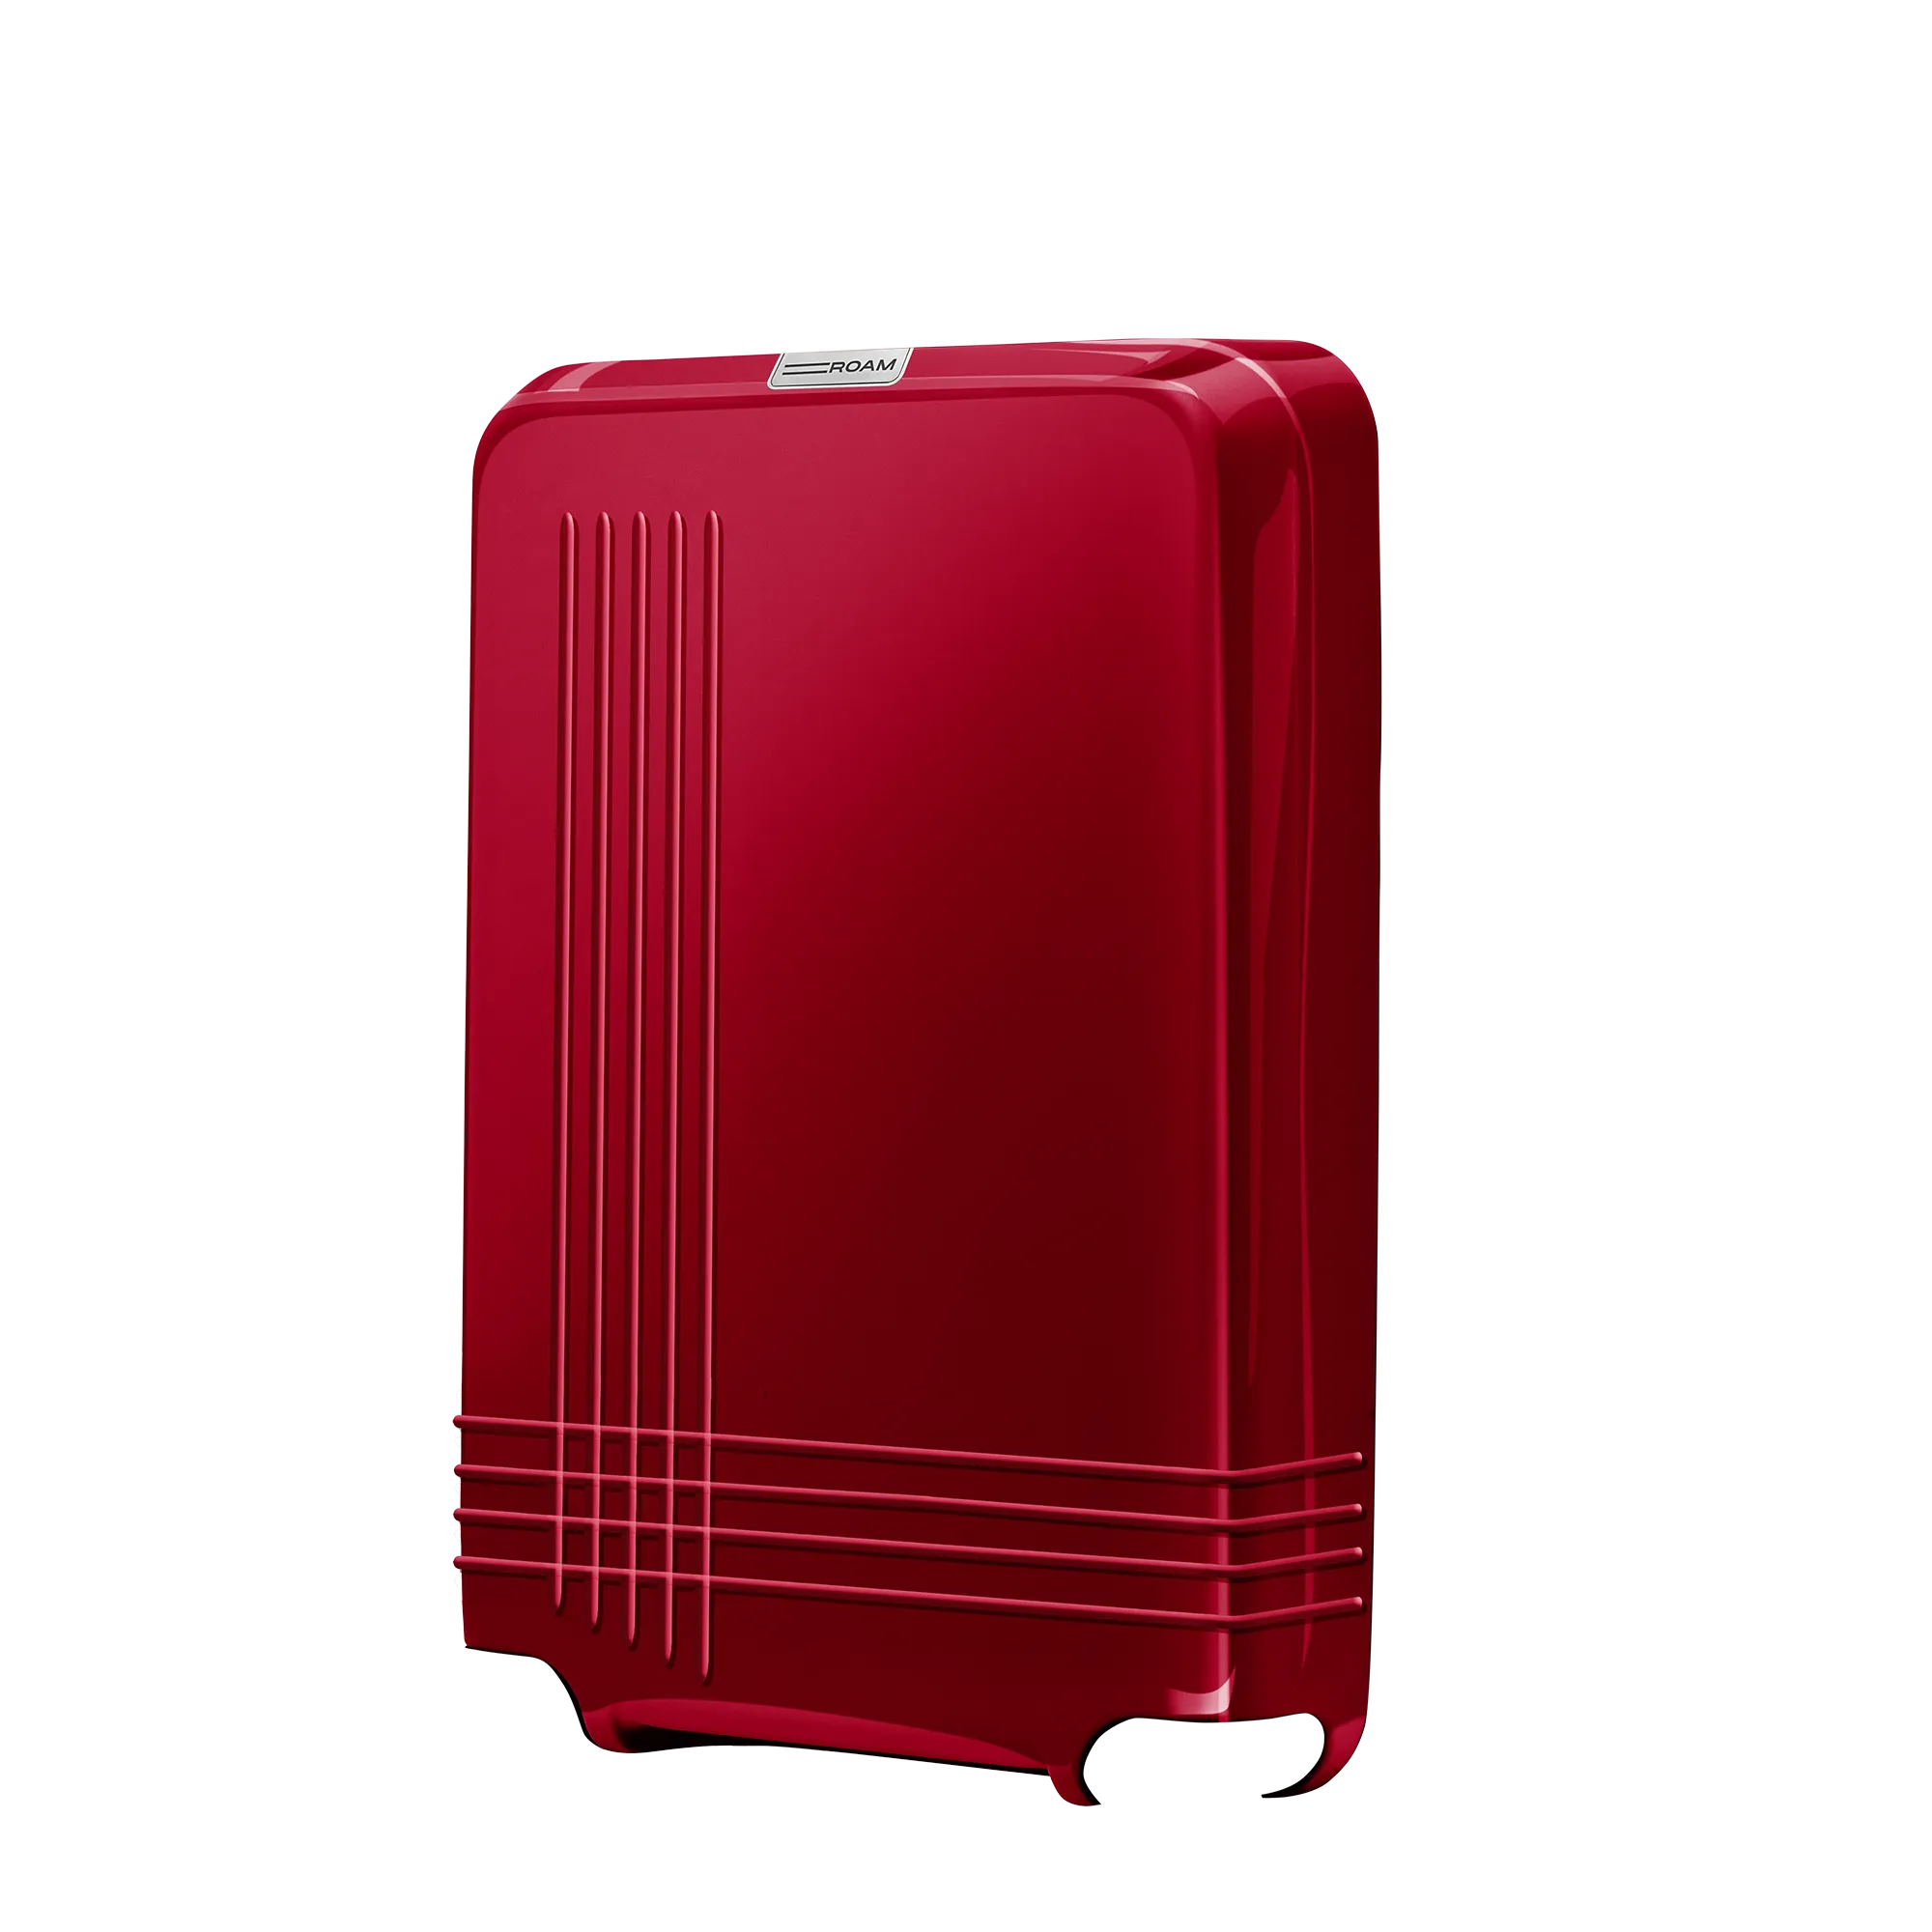 luggage large check in front shell in glossy red